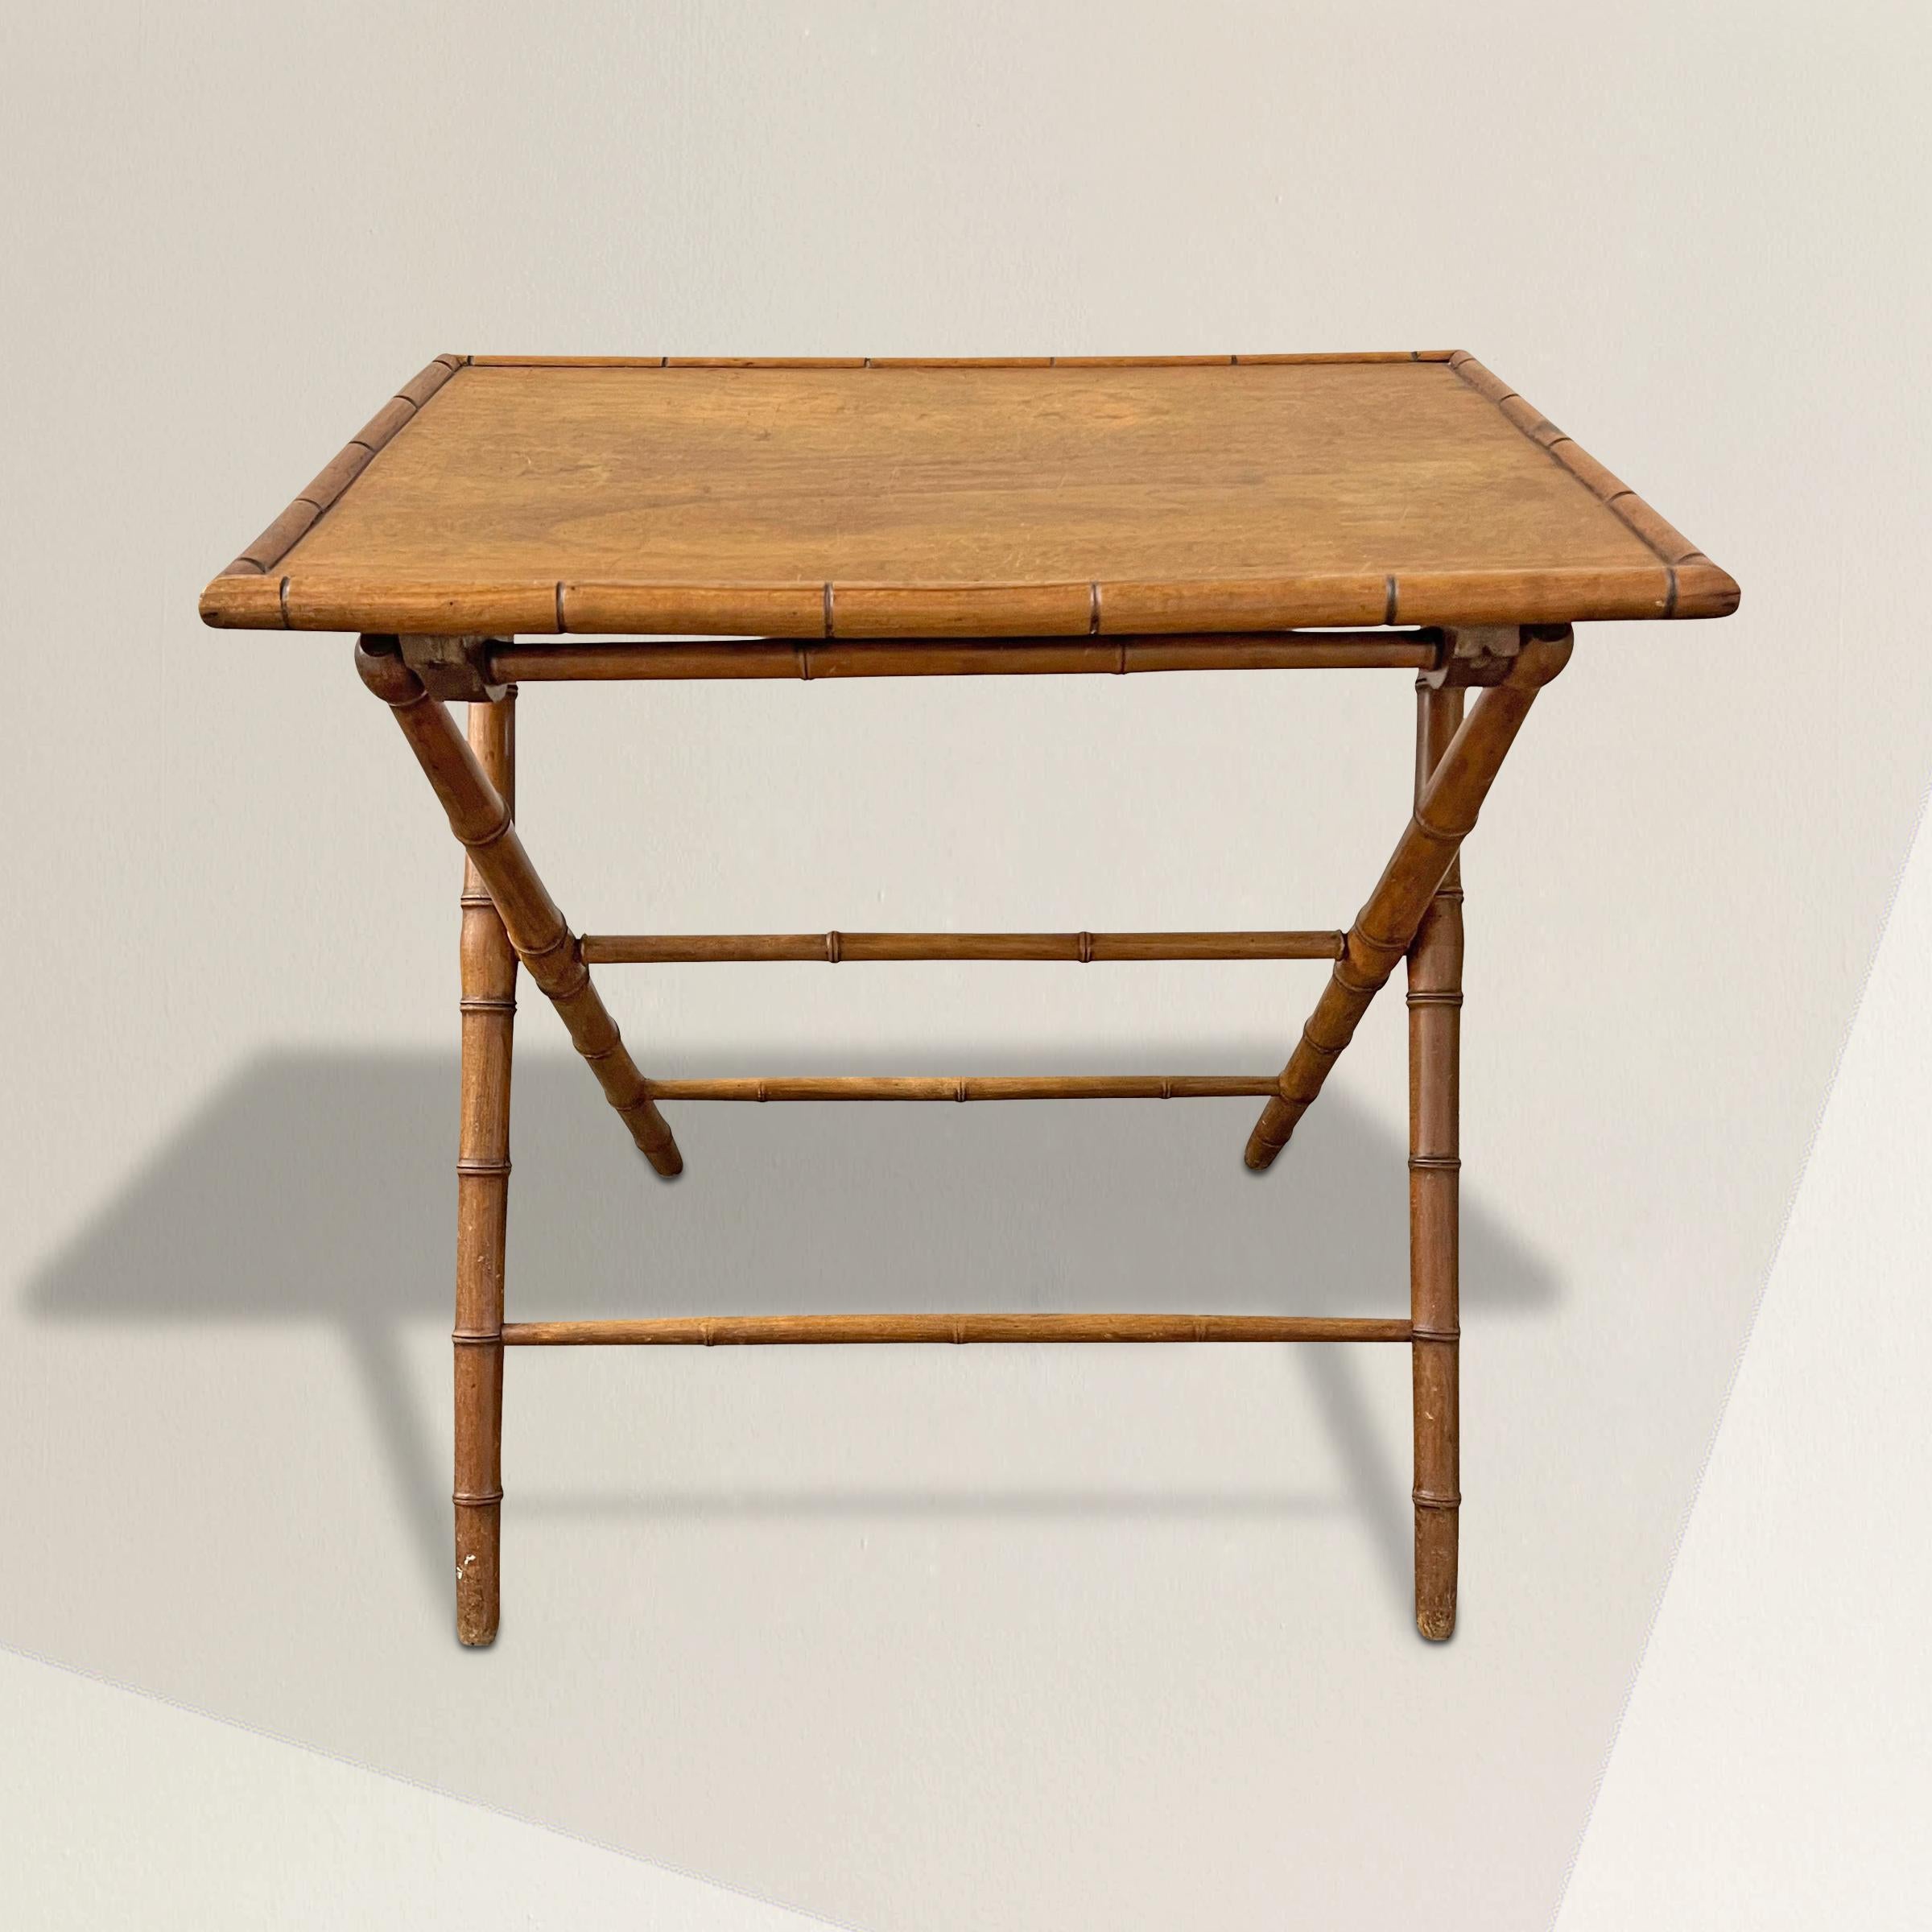 A charing early 20th century French folding cafe table carved of maple and meant to mimic bamboo. Originally used in a cafe, the table is now the perfect side table, night stand, or occasional table that you can tuck away when I not in use.